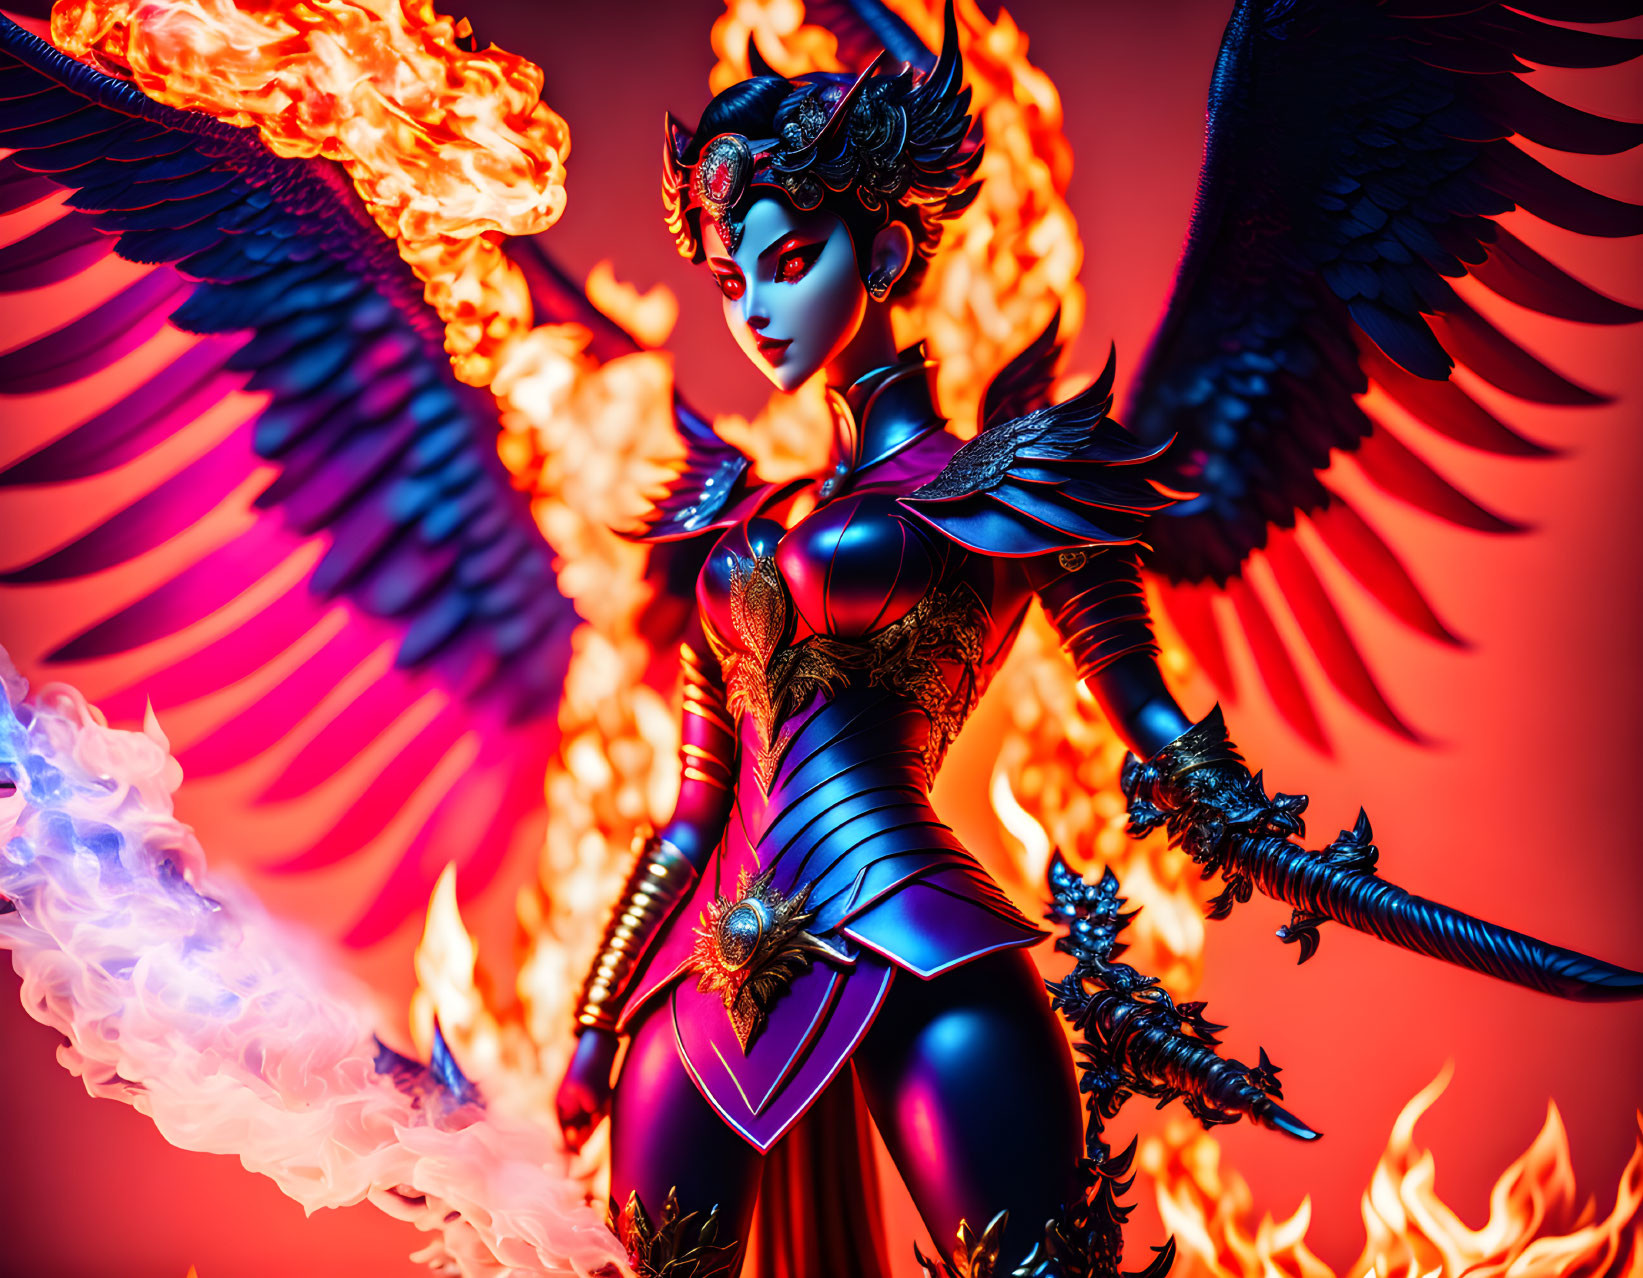 Demona: The fires of rage